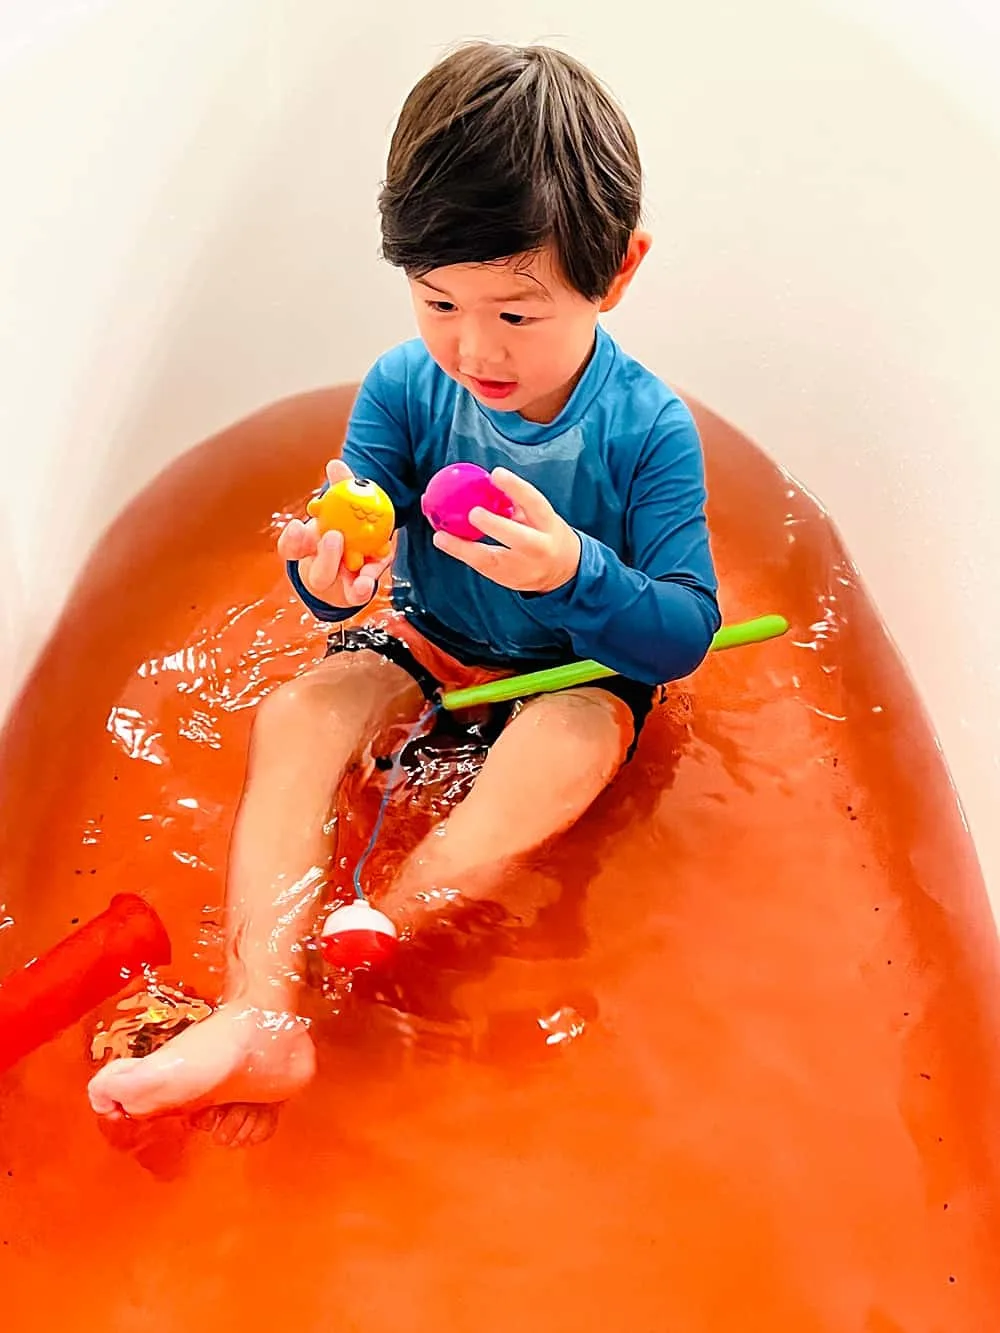 Bath Time Art Bundle with Dropz Fizzies Crayons Markers and